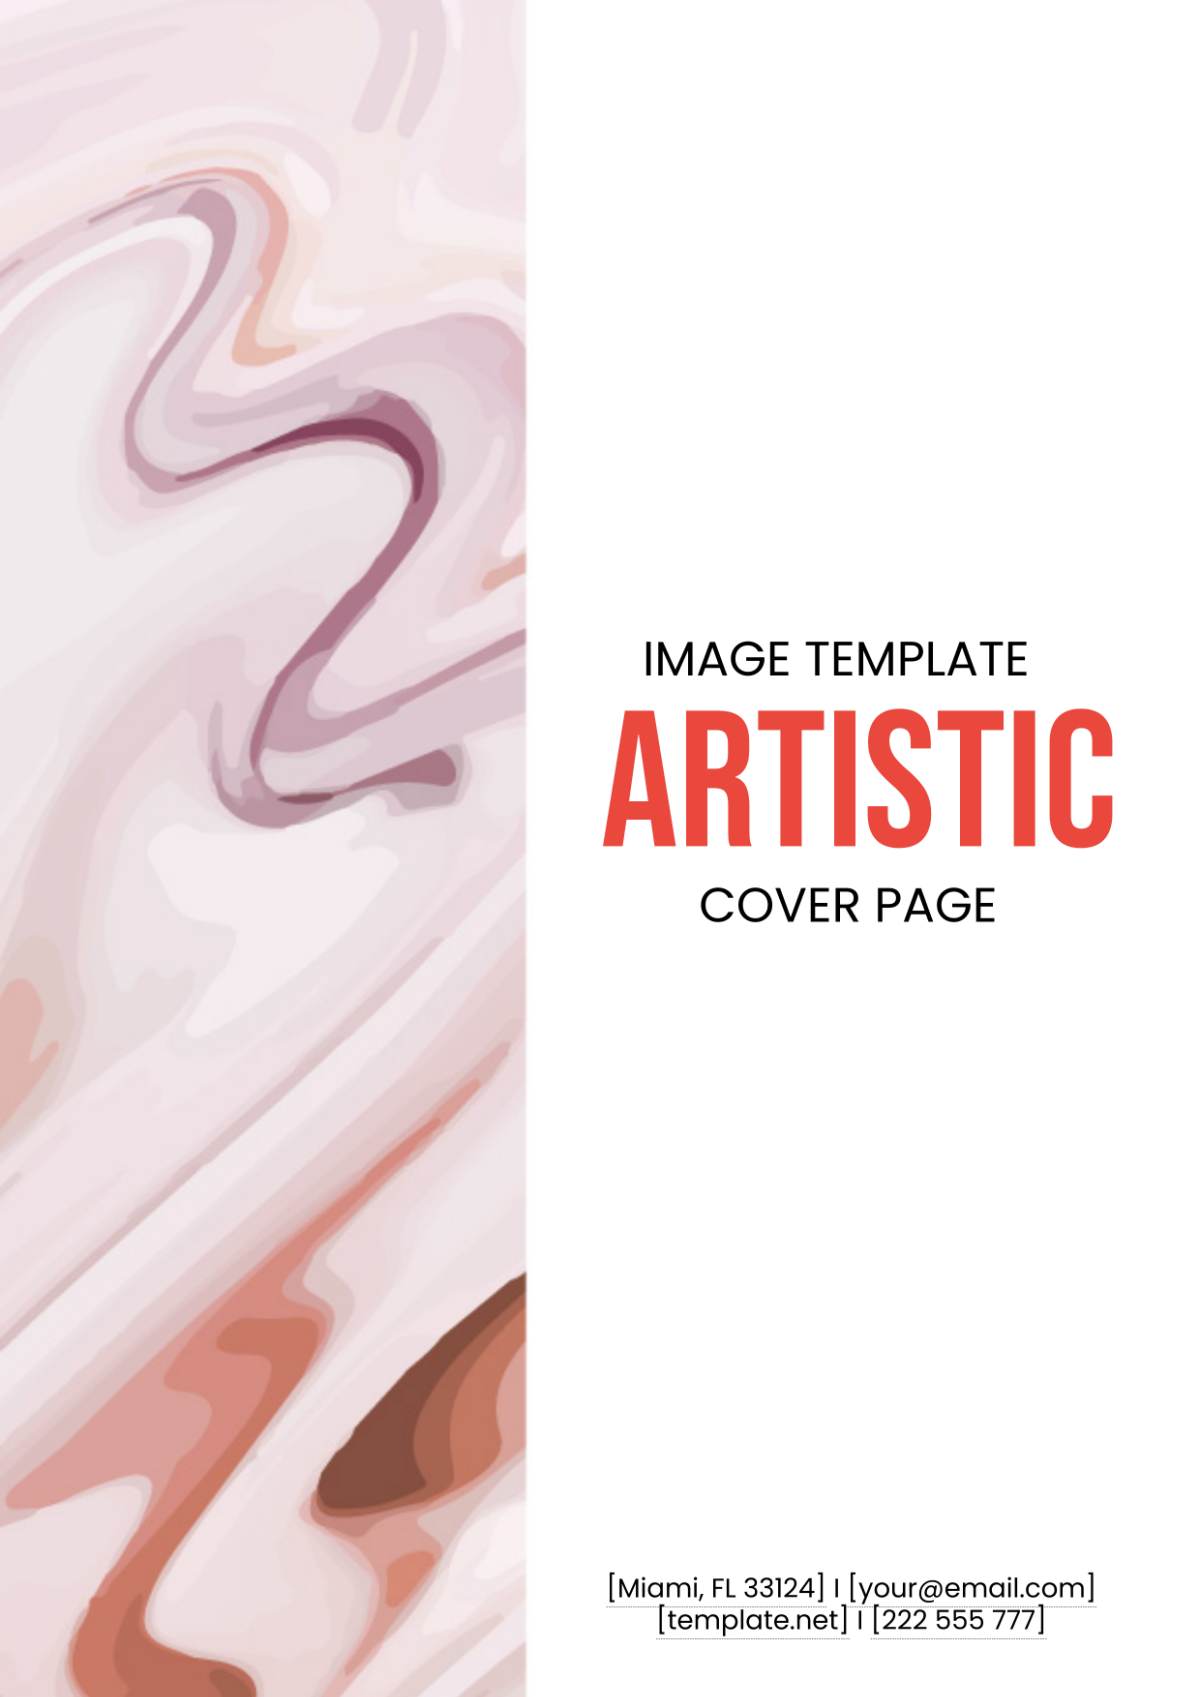 Artistic Cover Page Image Template